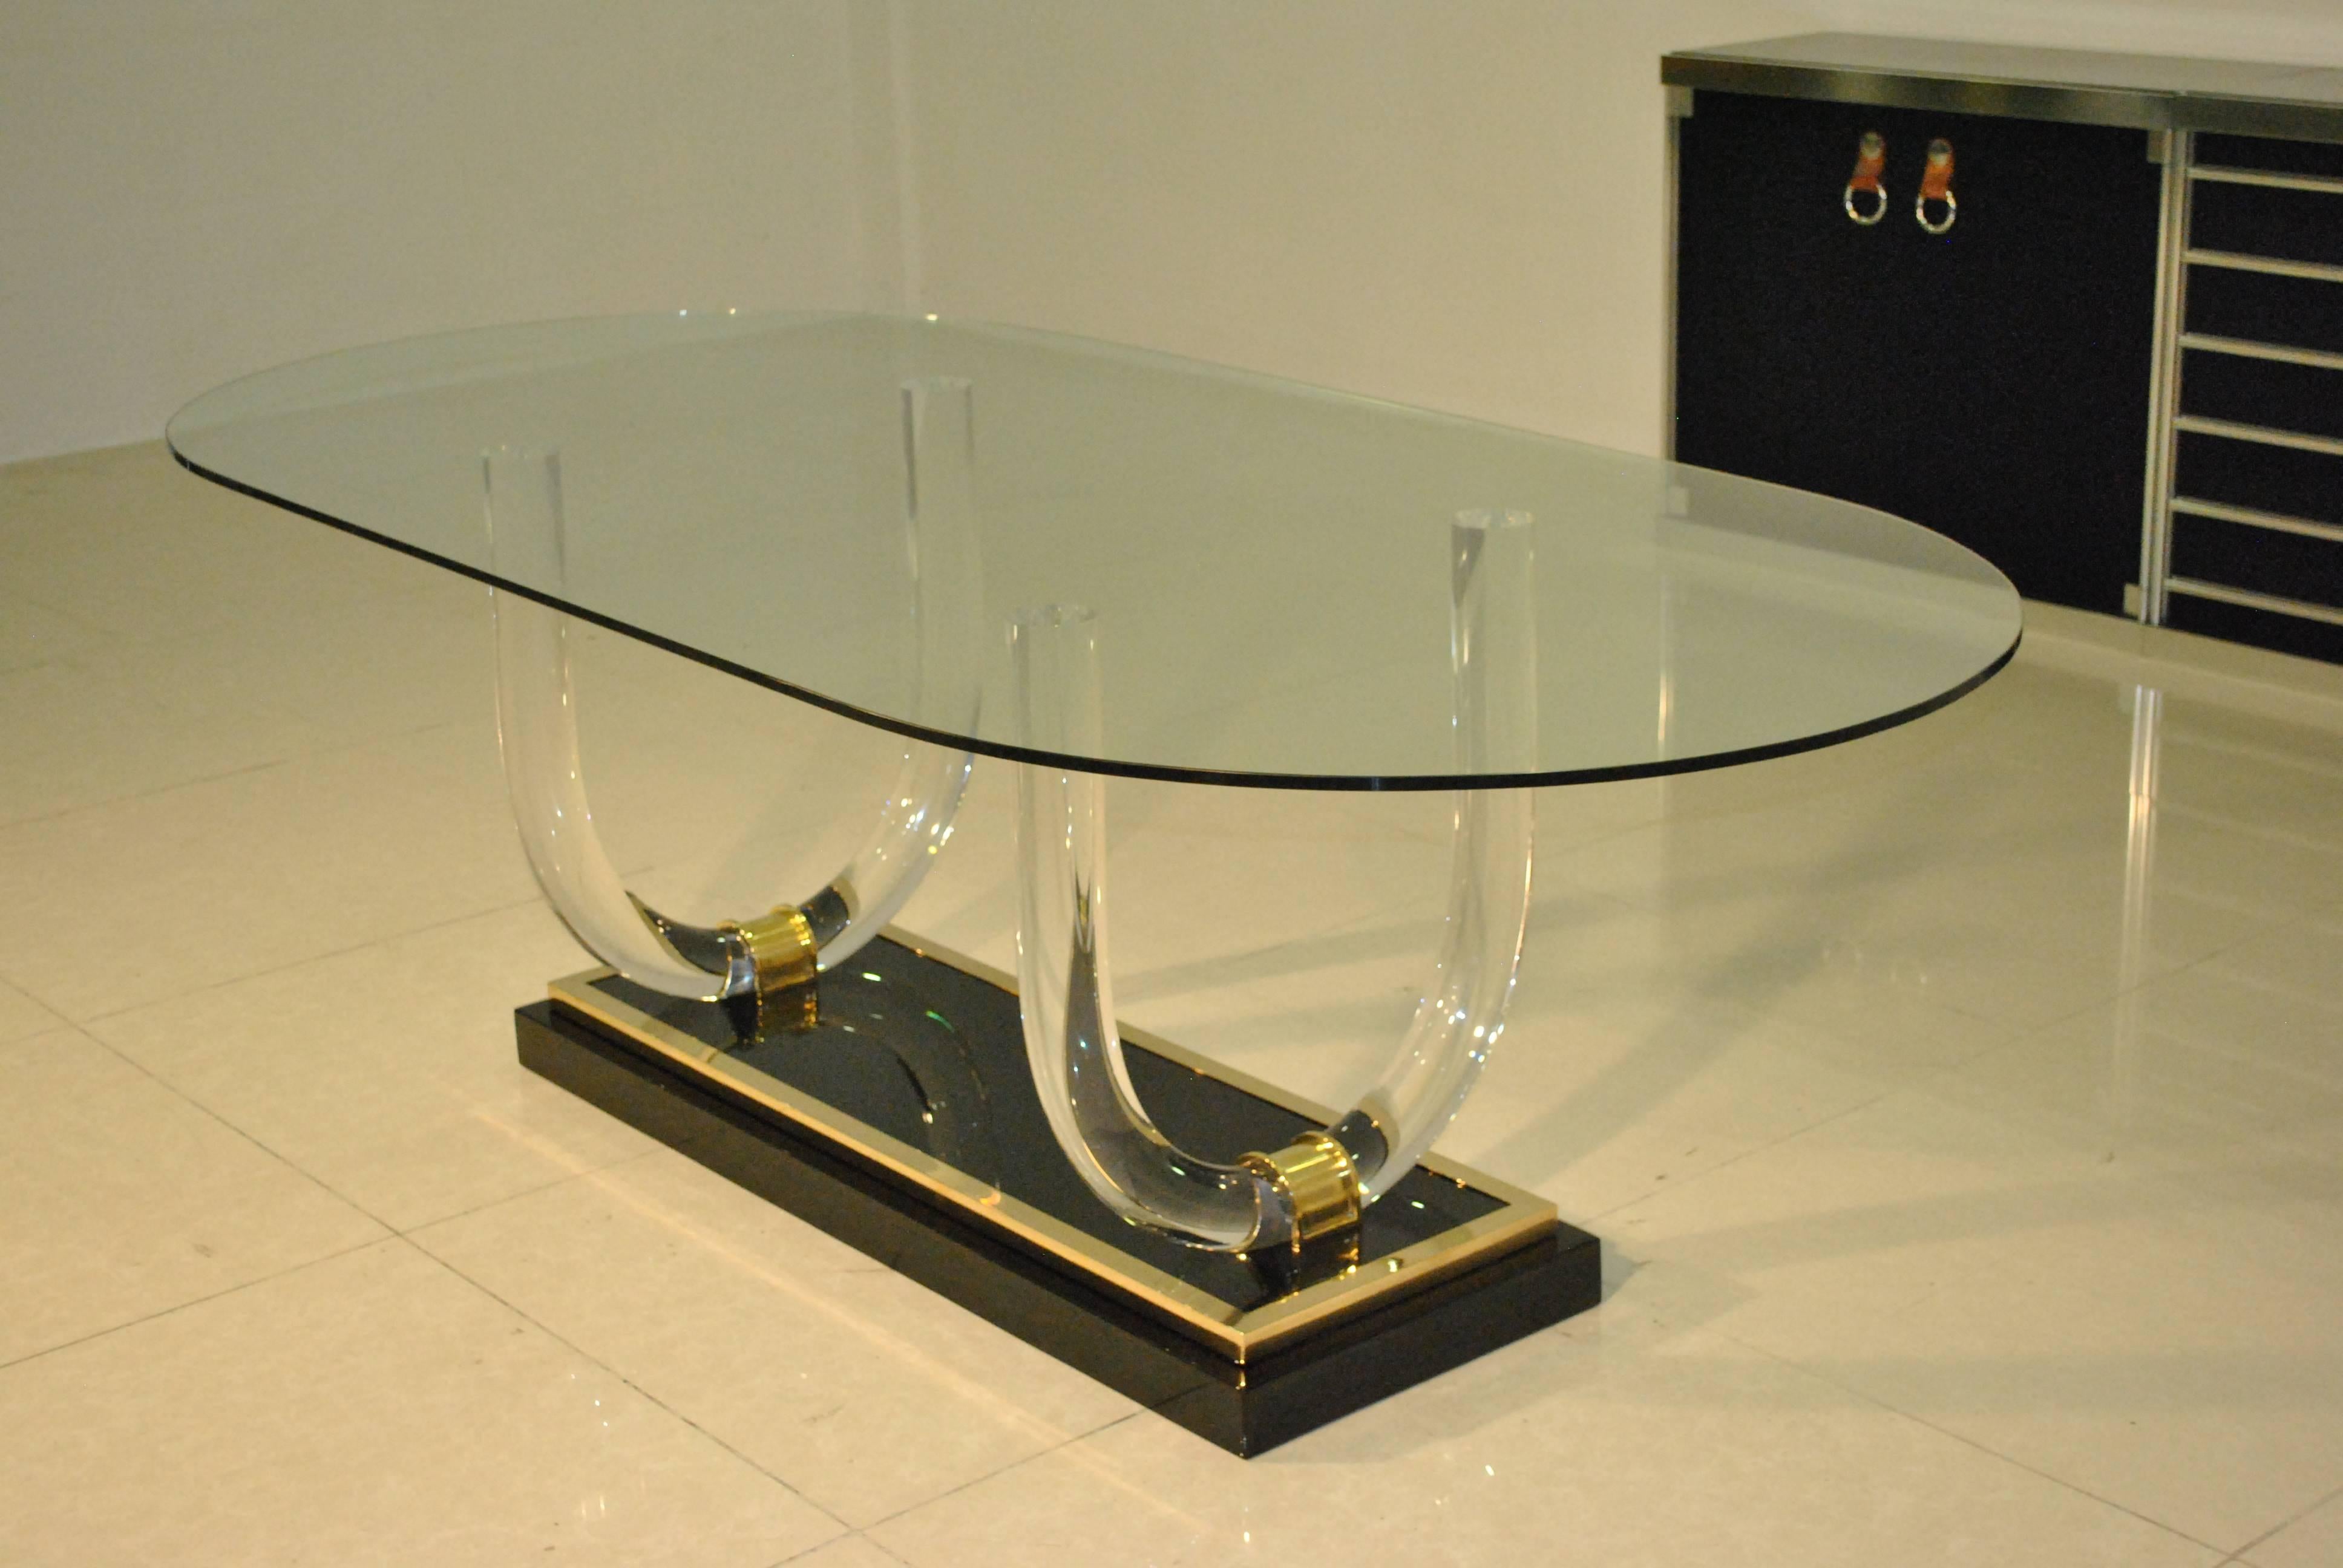 A very rare and large Lucite, lacquer and brass dining table by Charles Hollis Jones for reknown house of Romeo Paris. Could look great as a desk or centre table also.
Original glass top, the lacquer and brass base has entirely been refinished by